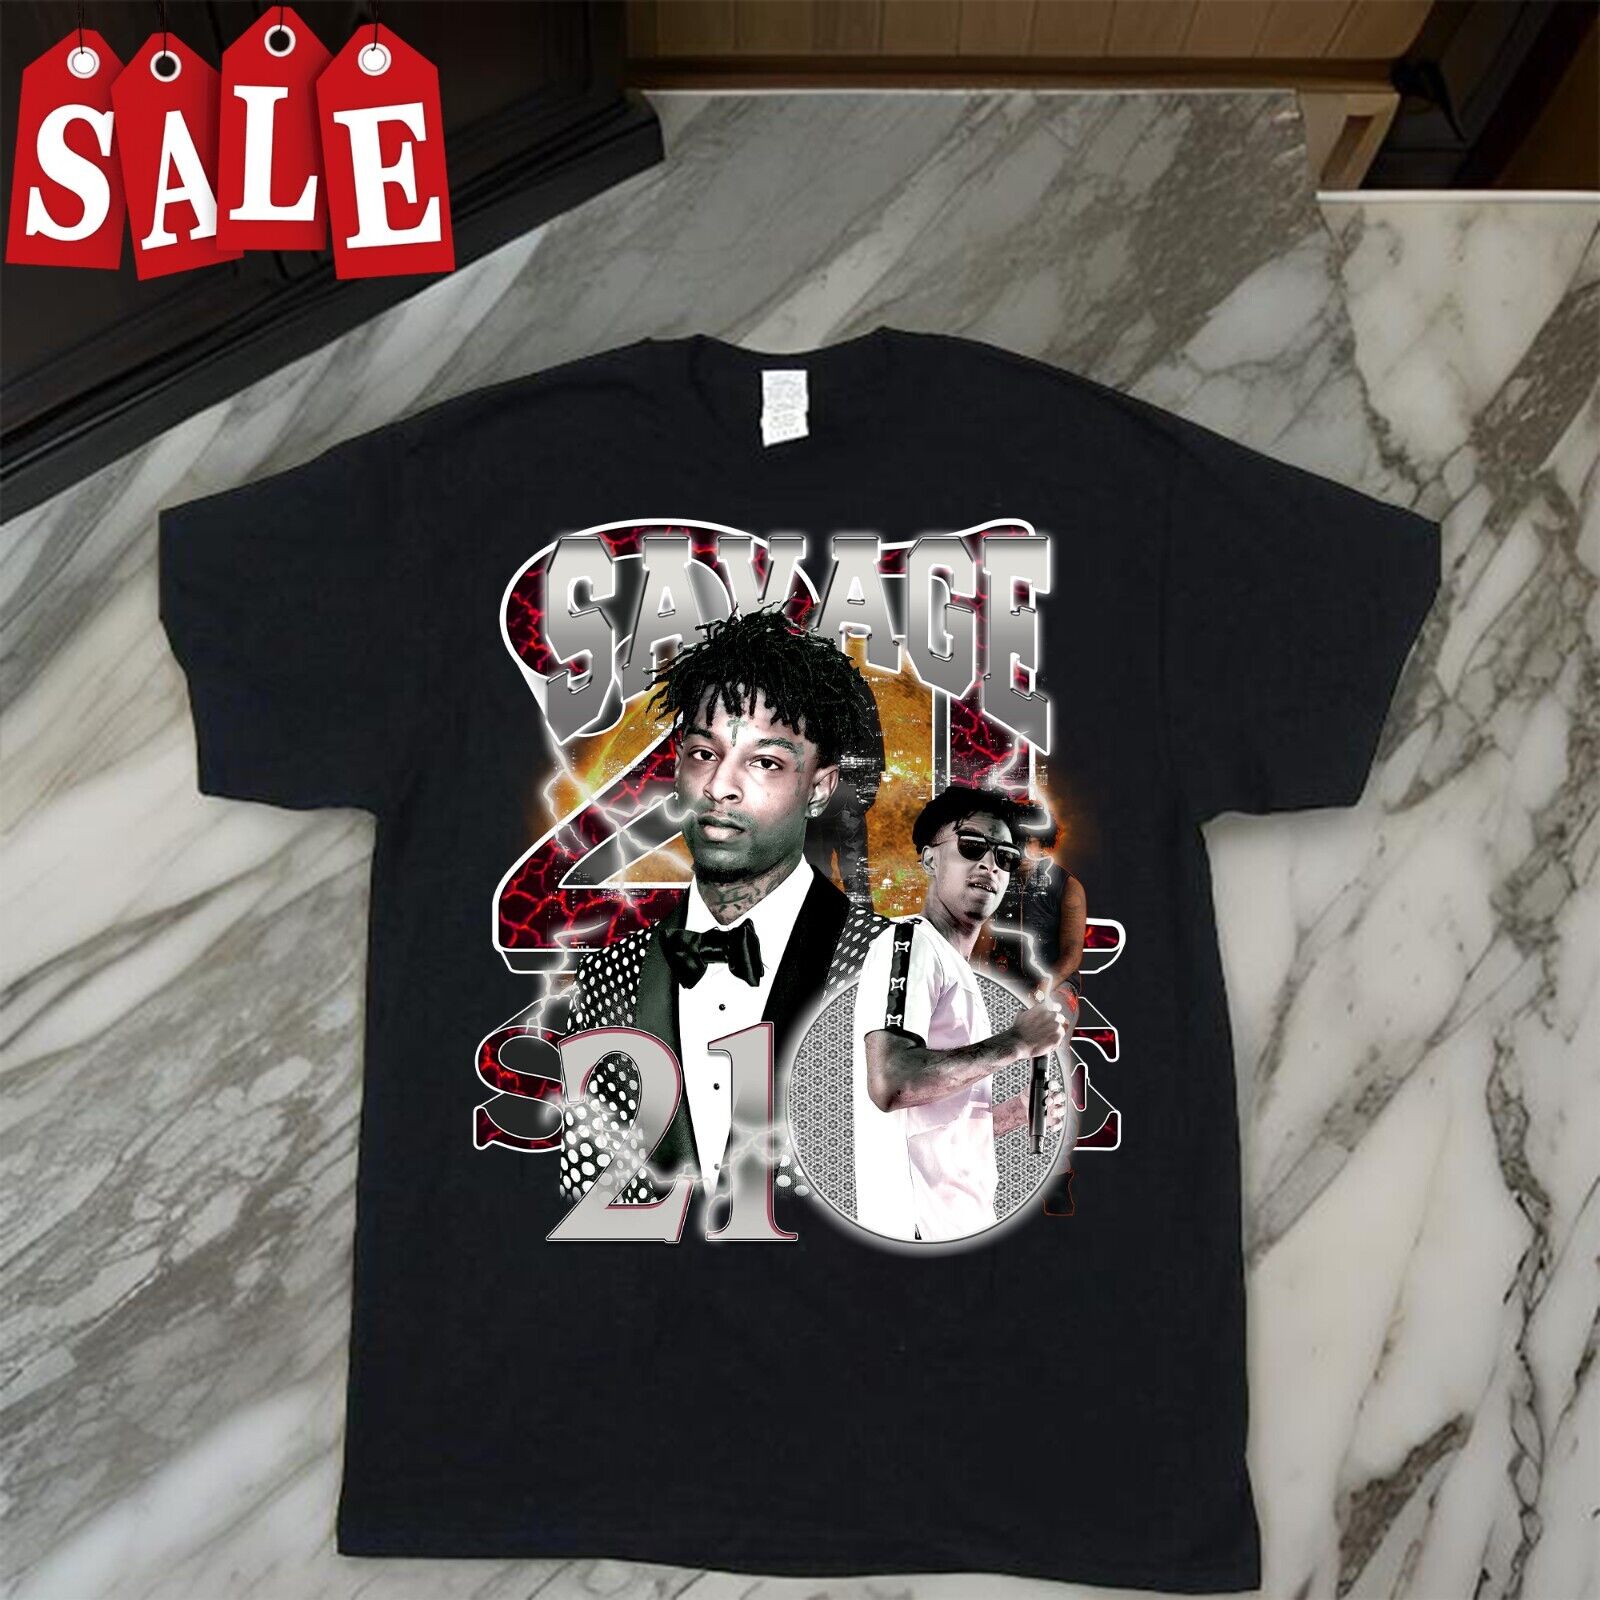 New 21 Savage Gift For Fans Unisex S-5XL Shirt SR107.1